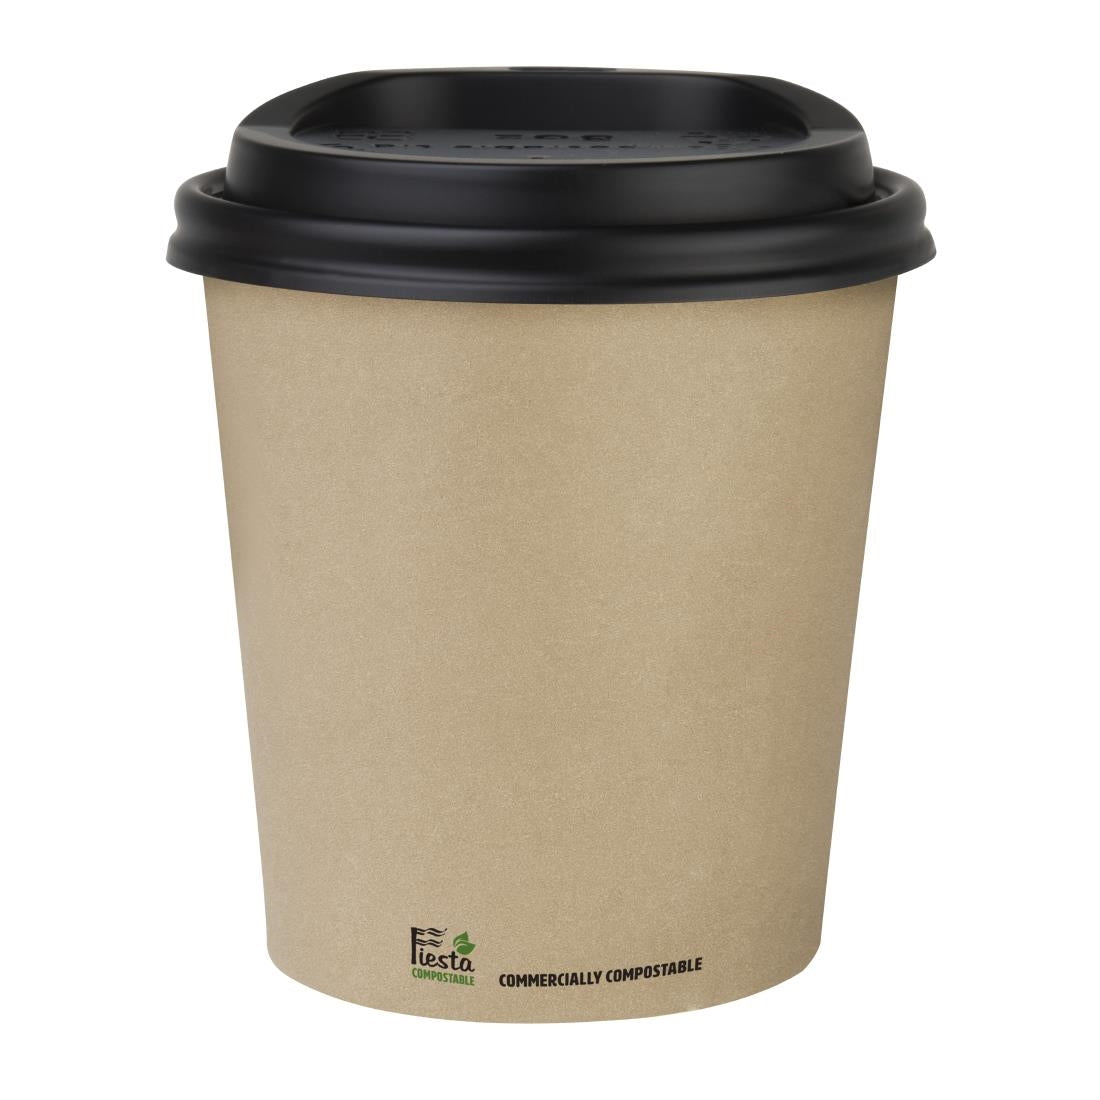 CU981 Fiesta Compostable Coffee Cups Single Wall 8oz (Pack of 50)